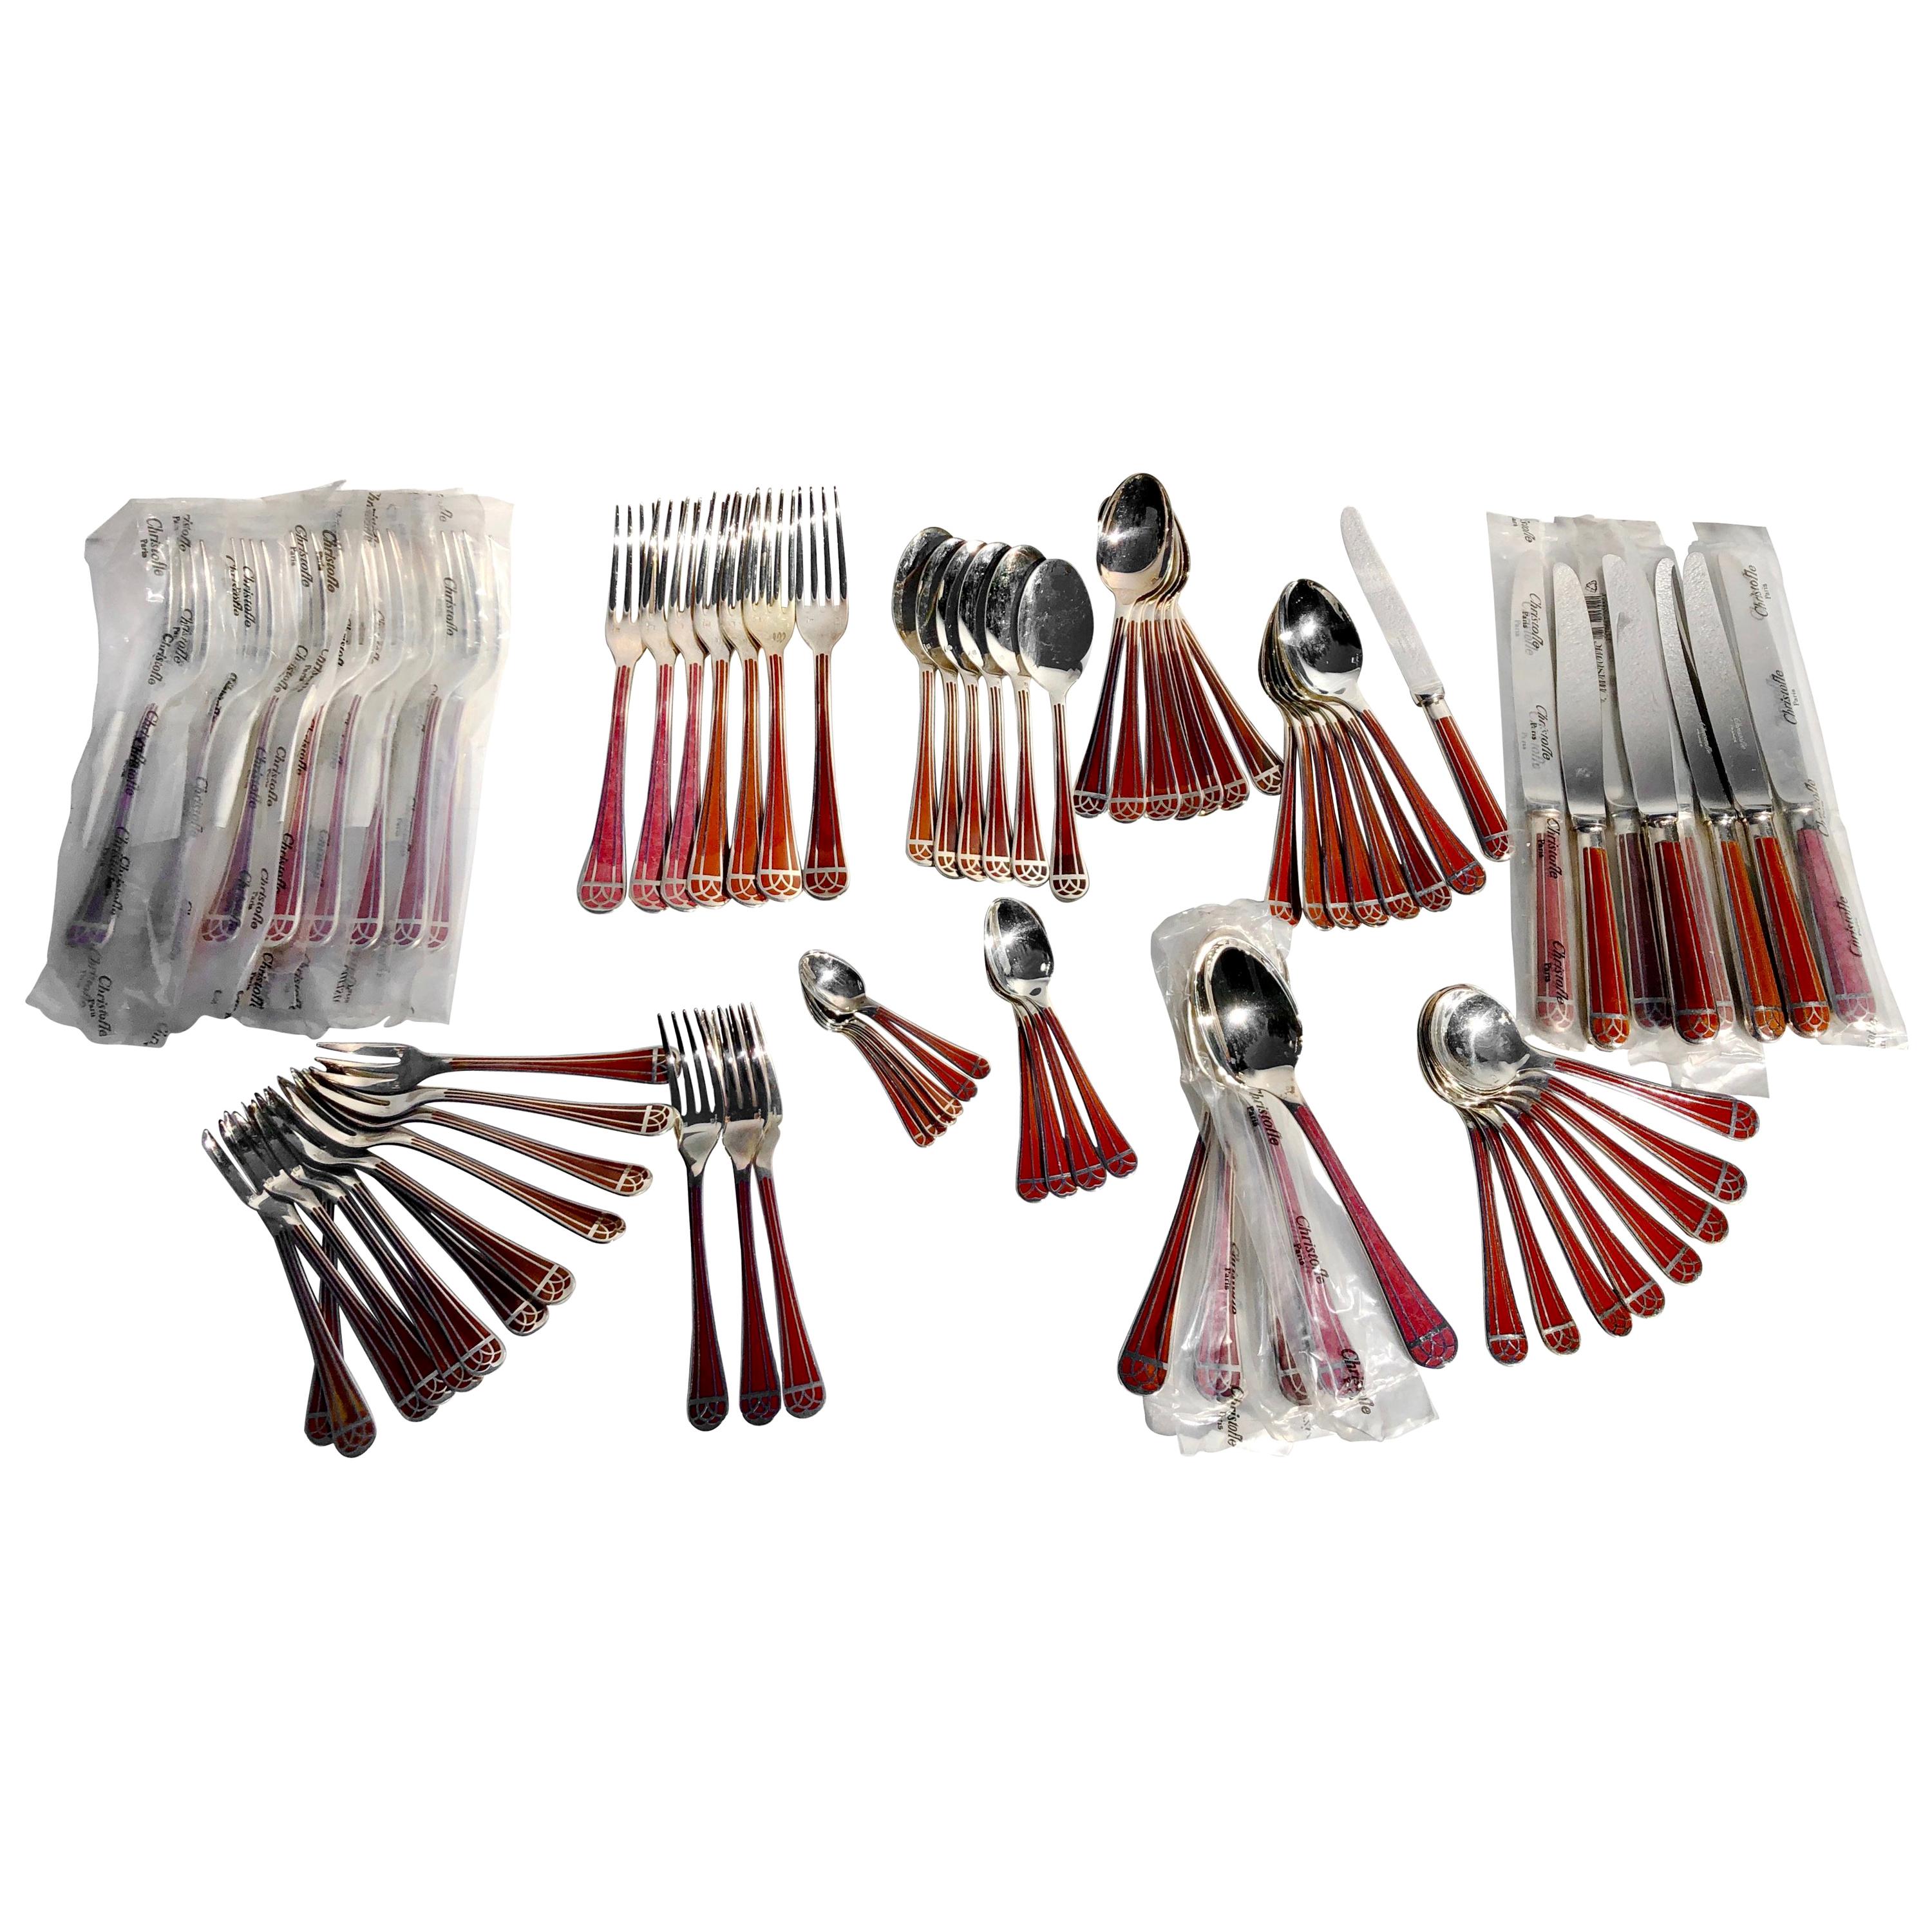 82-Piece Set of French Christofle "Talisman Rouge" Chinese Lacquer Silverware For Sale